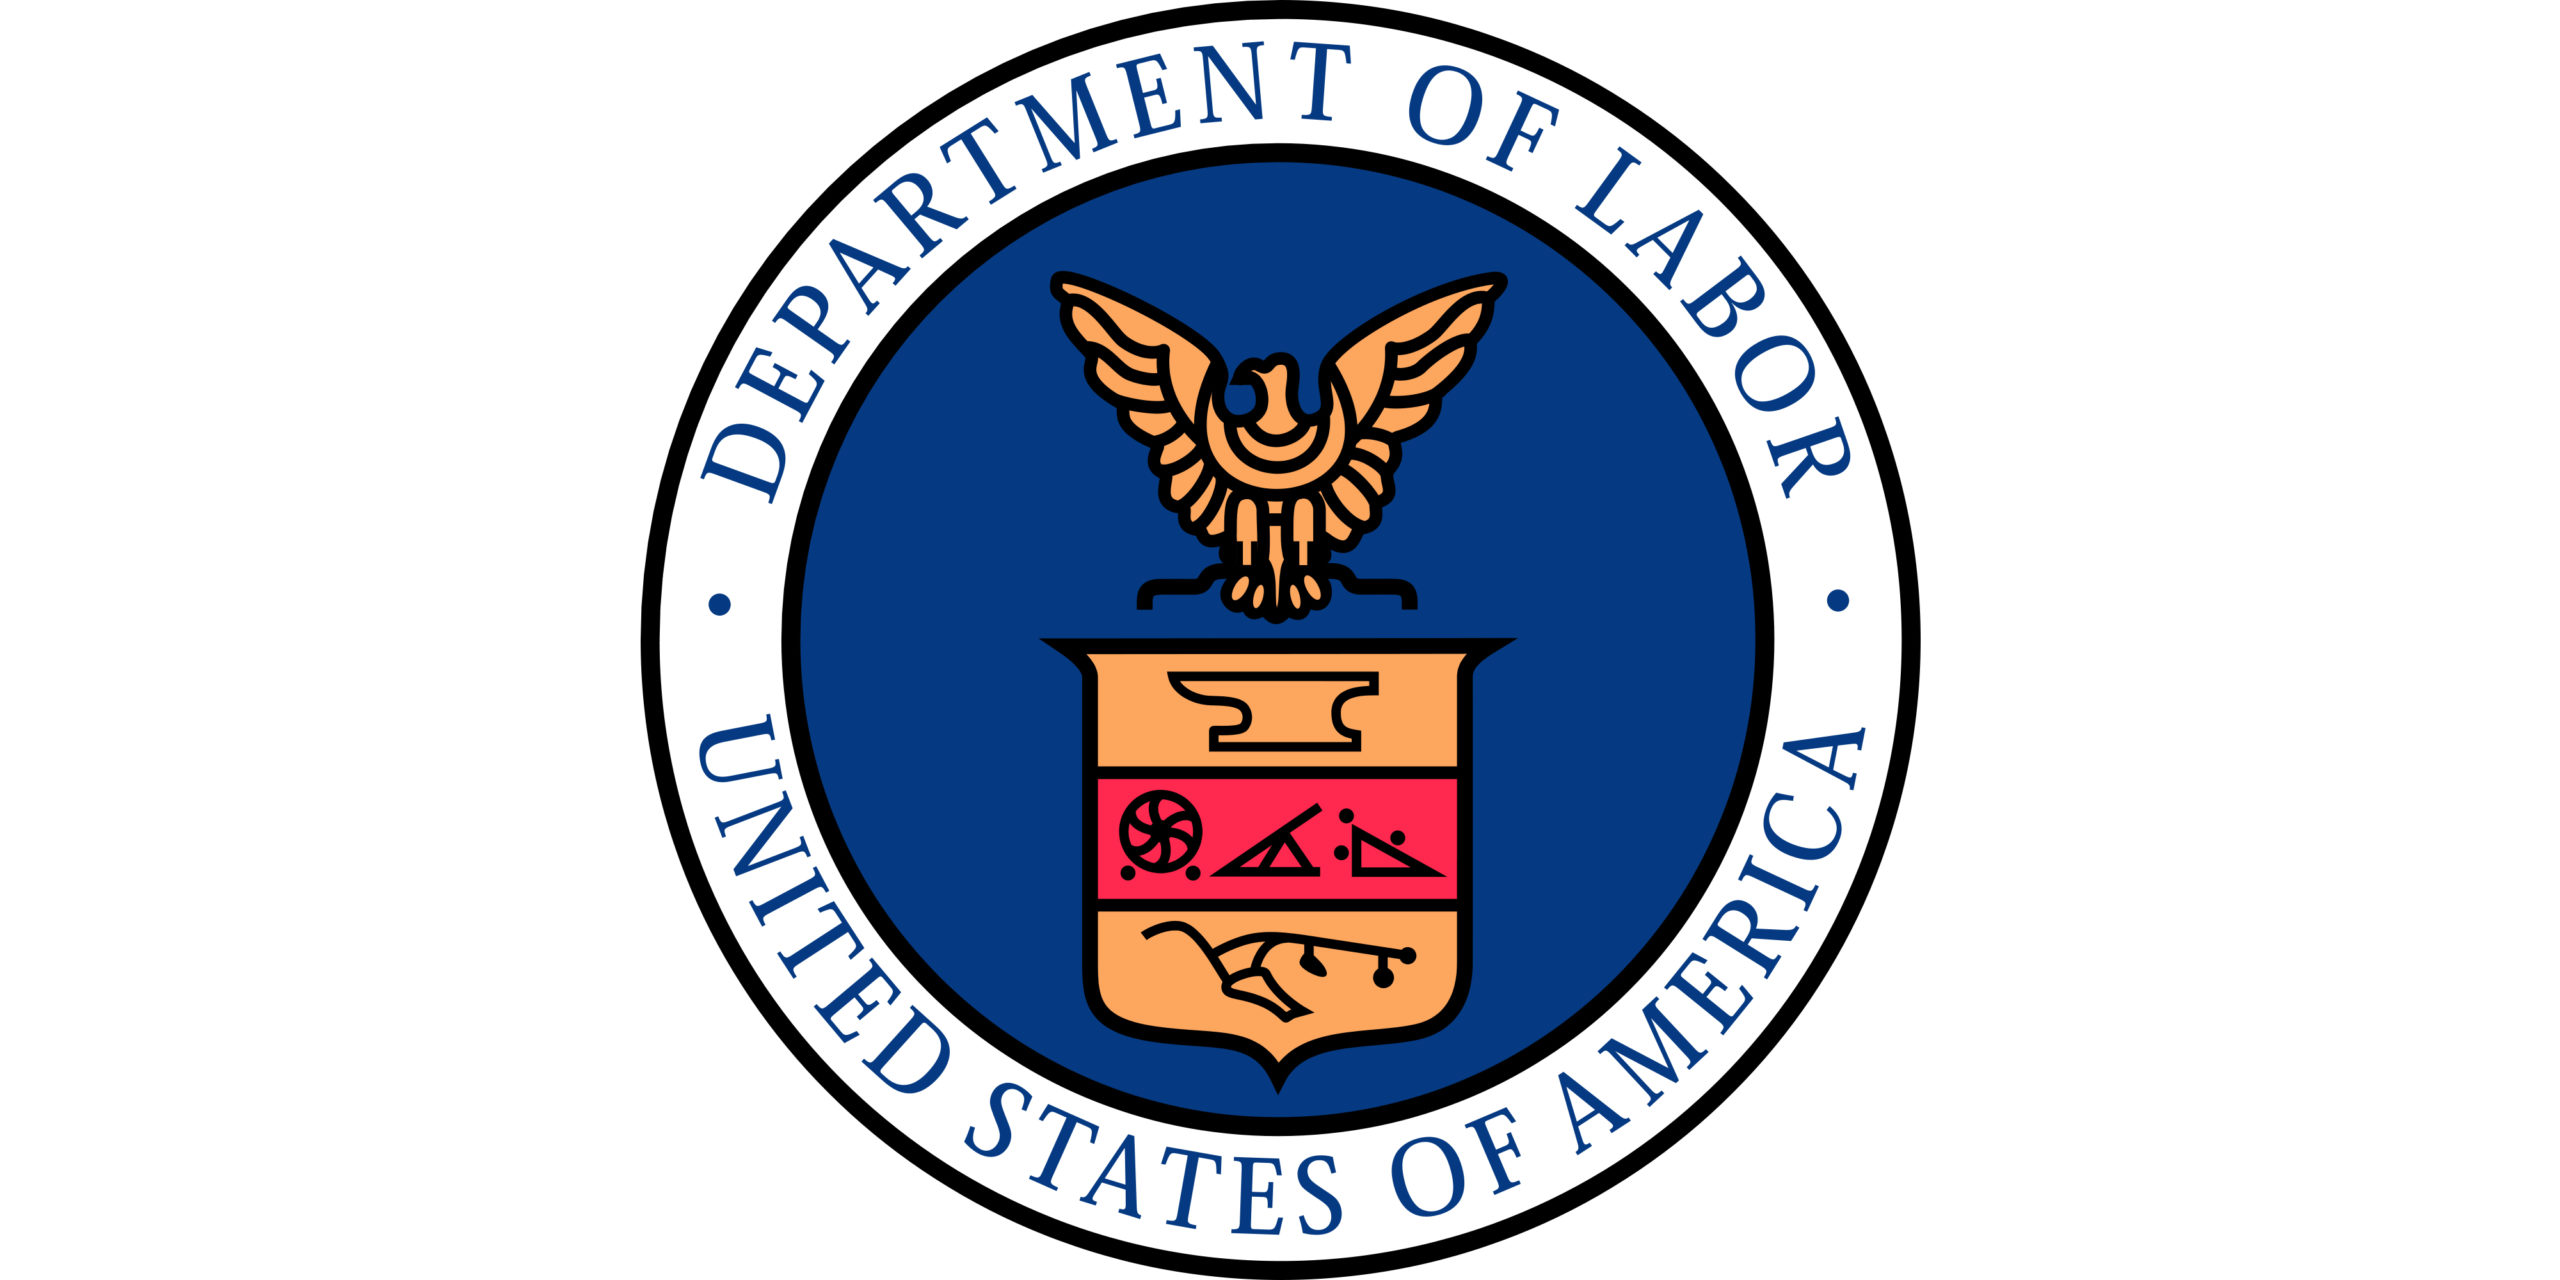 dept of labor and employment logo